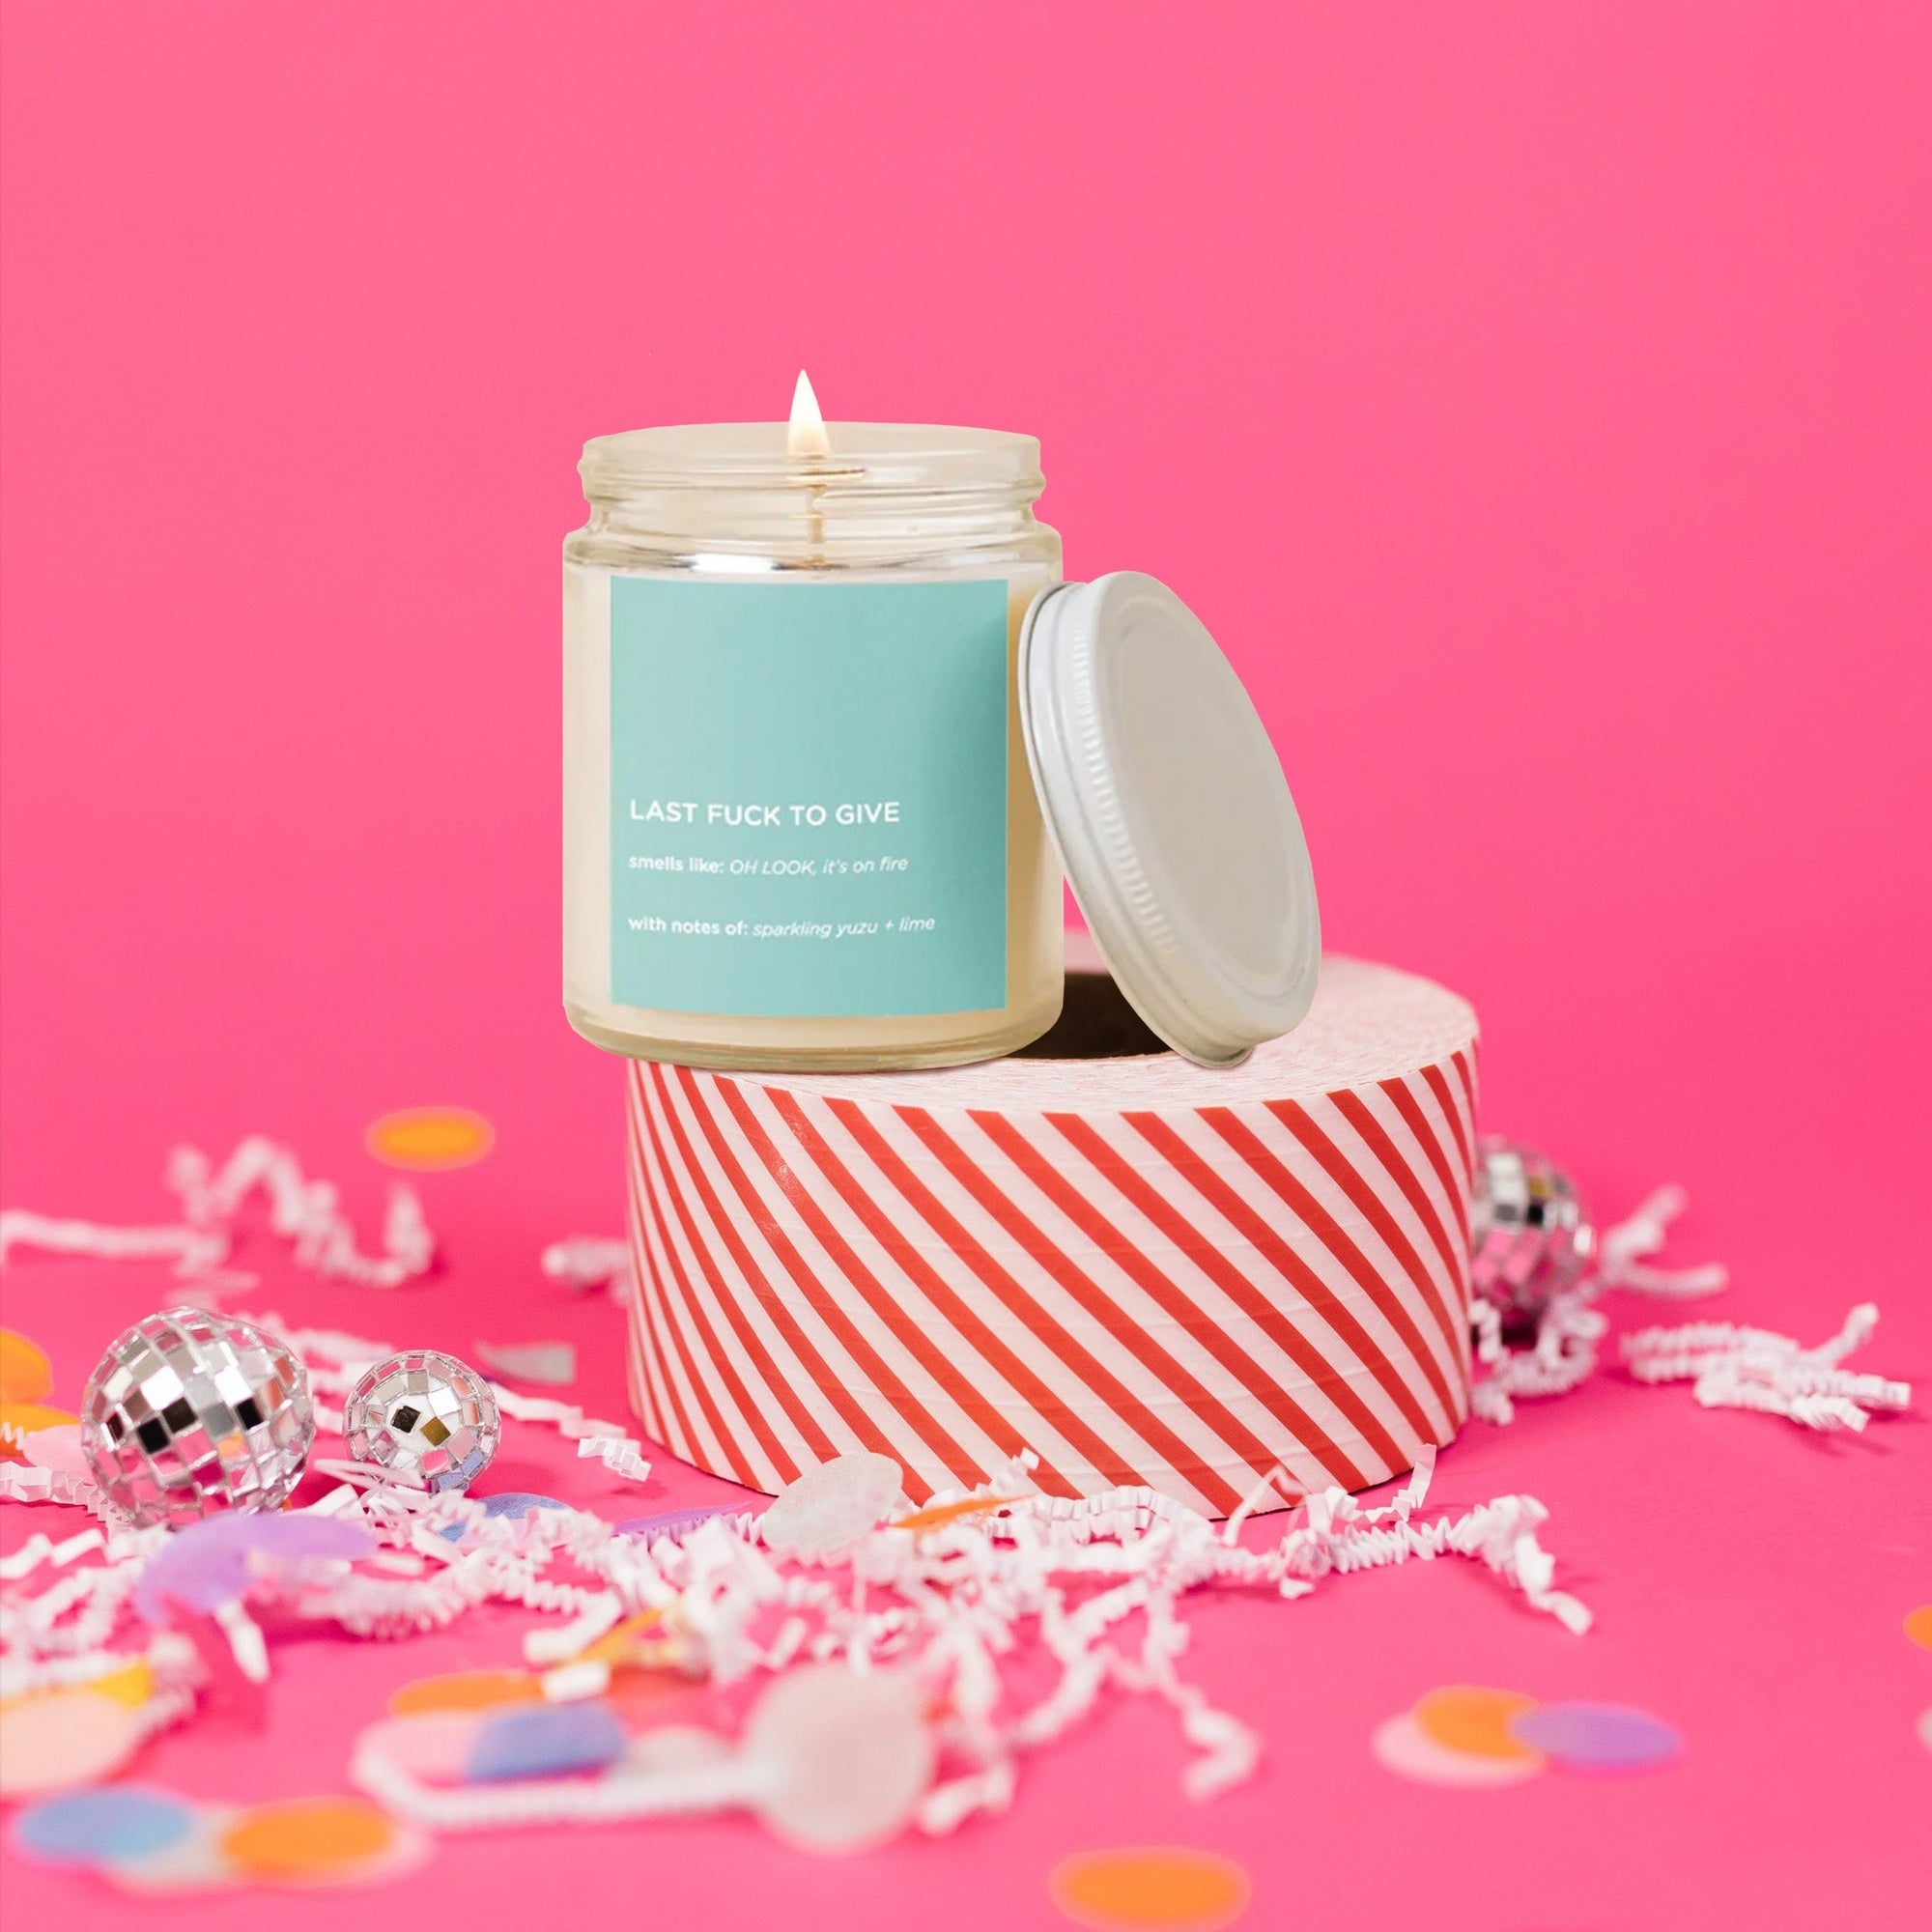 On a hot pink background sits a candle with a lid atop a red and white striped packing tape. There are white crinkle and big, colorful confetti scattered around. The glass candle is lit with a mint label. It says "LAST FUCK TO GIVE" in all caps, white block font. It also says "smells like: OH LOOK, it's on fire," "With notes of: sparkling yuzu + lime." It is in all white, block font. 